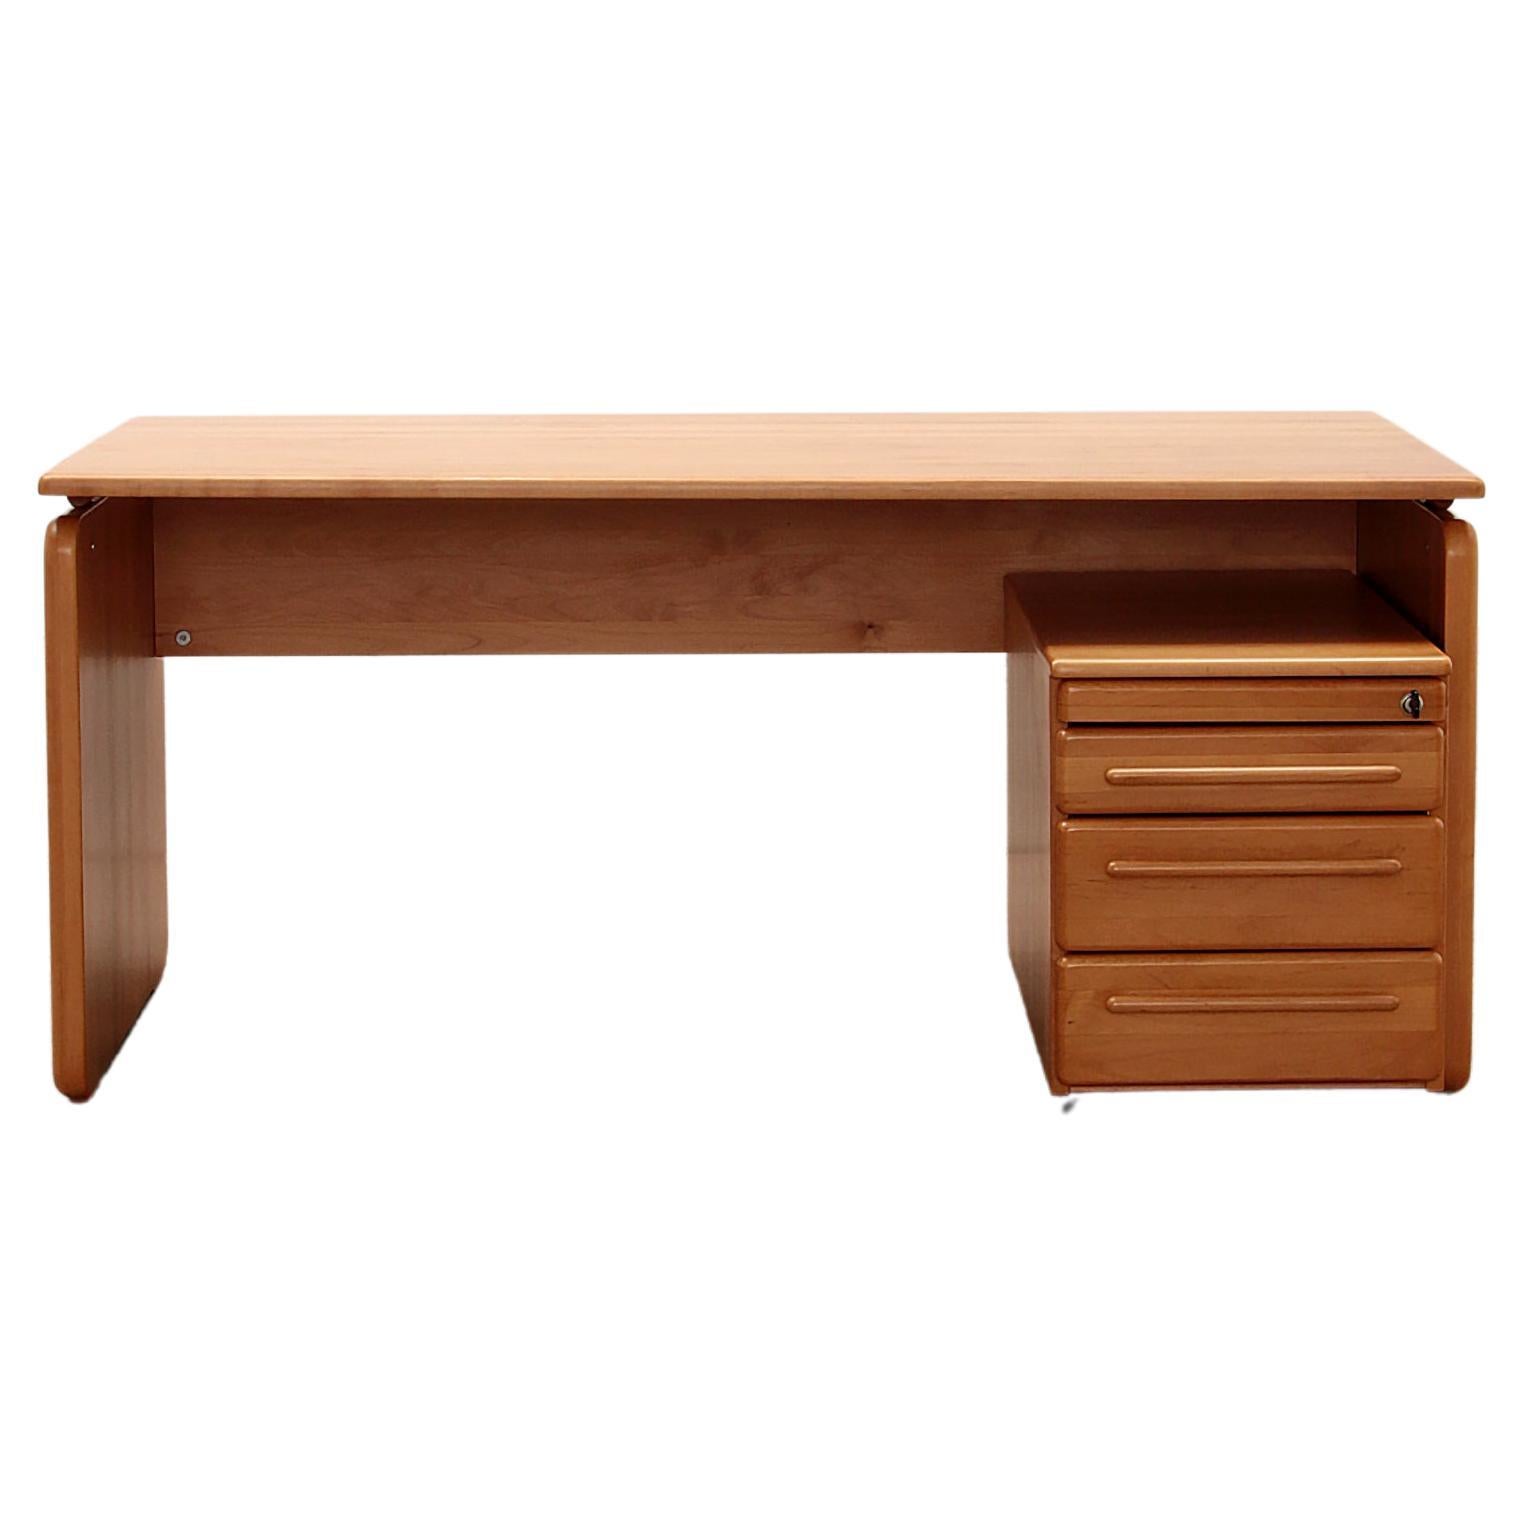 Solid Beechwood Desk with Drawers, 1970, Germany